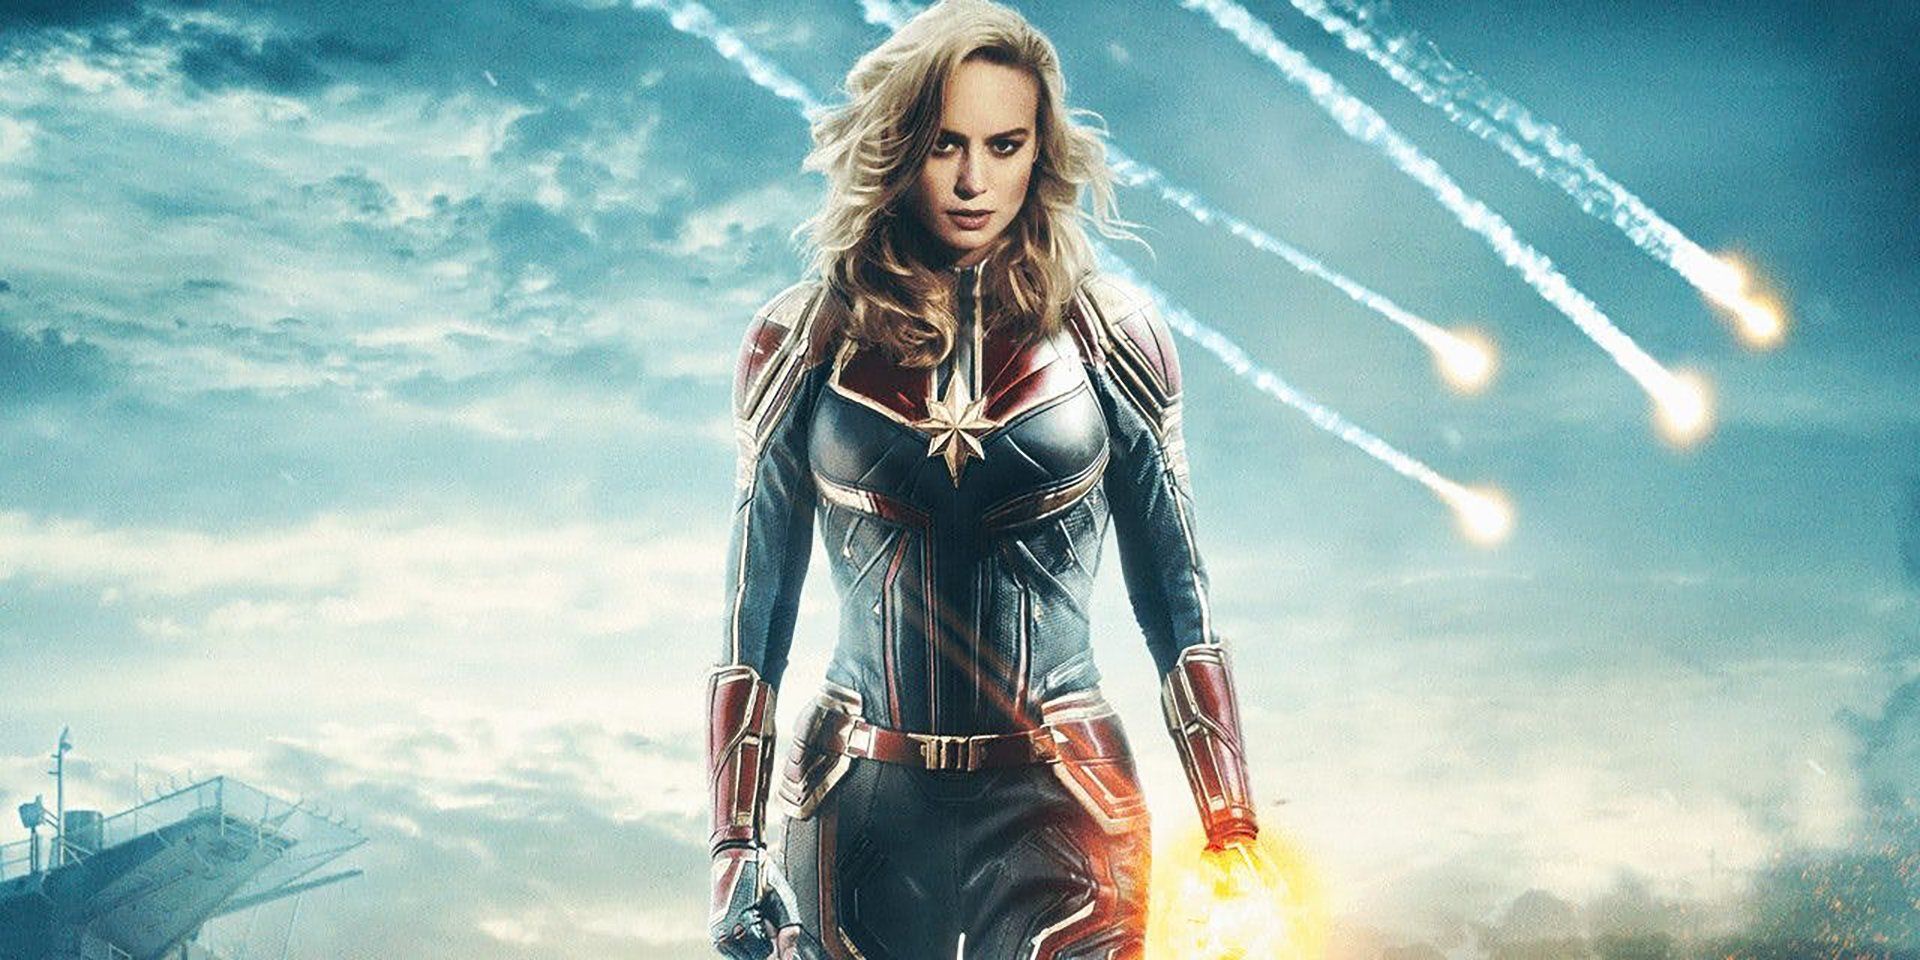 1125x2436 Captain Marvel Movie 4k 2019 Iphone XSIphone 10Iphone X HD 4k  Wallpapers Images Backgrounds Photos and Pictures  Мстители Халк  Марве л